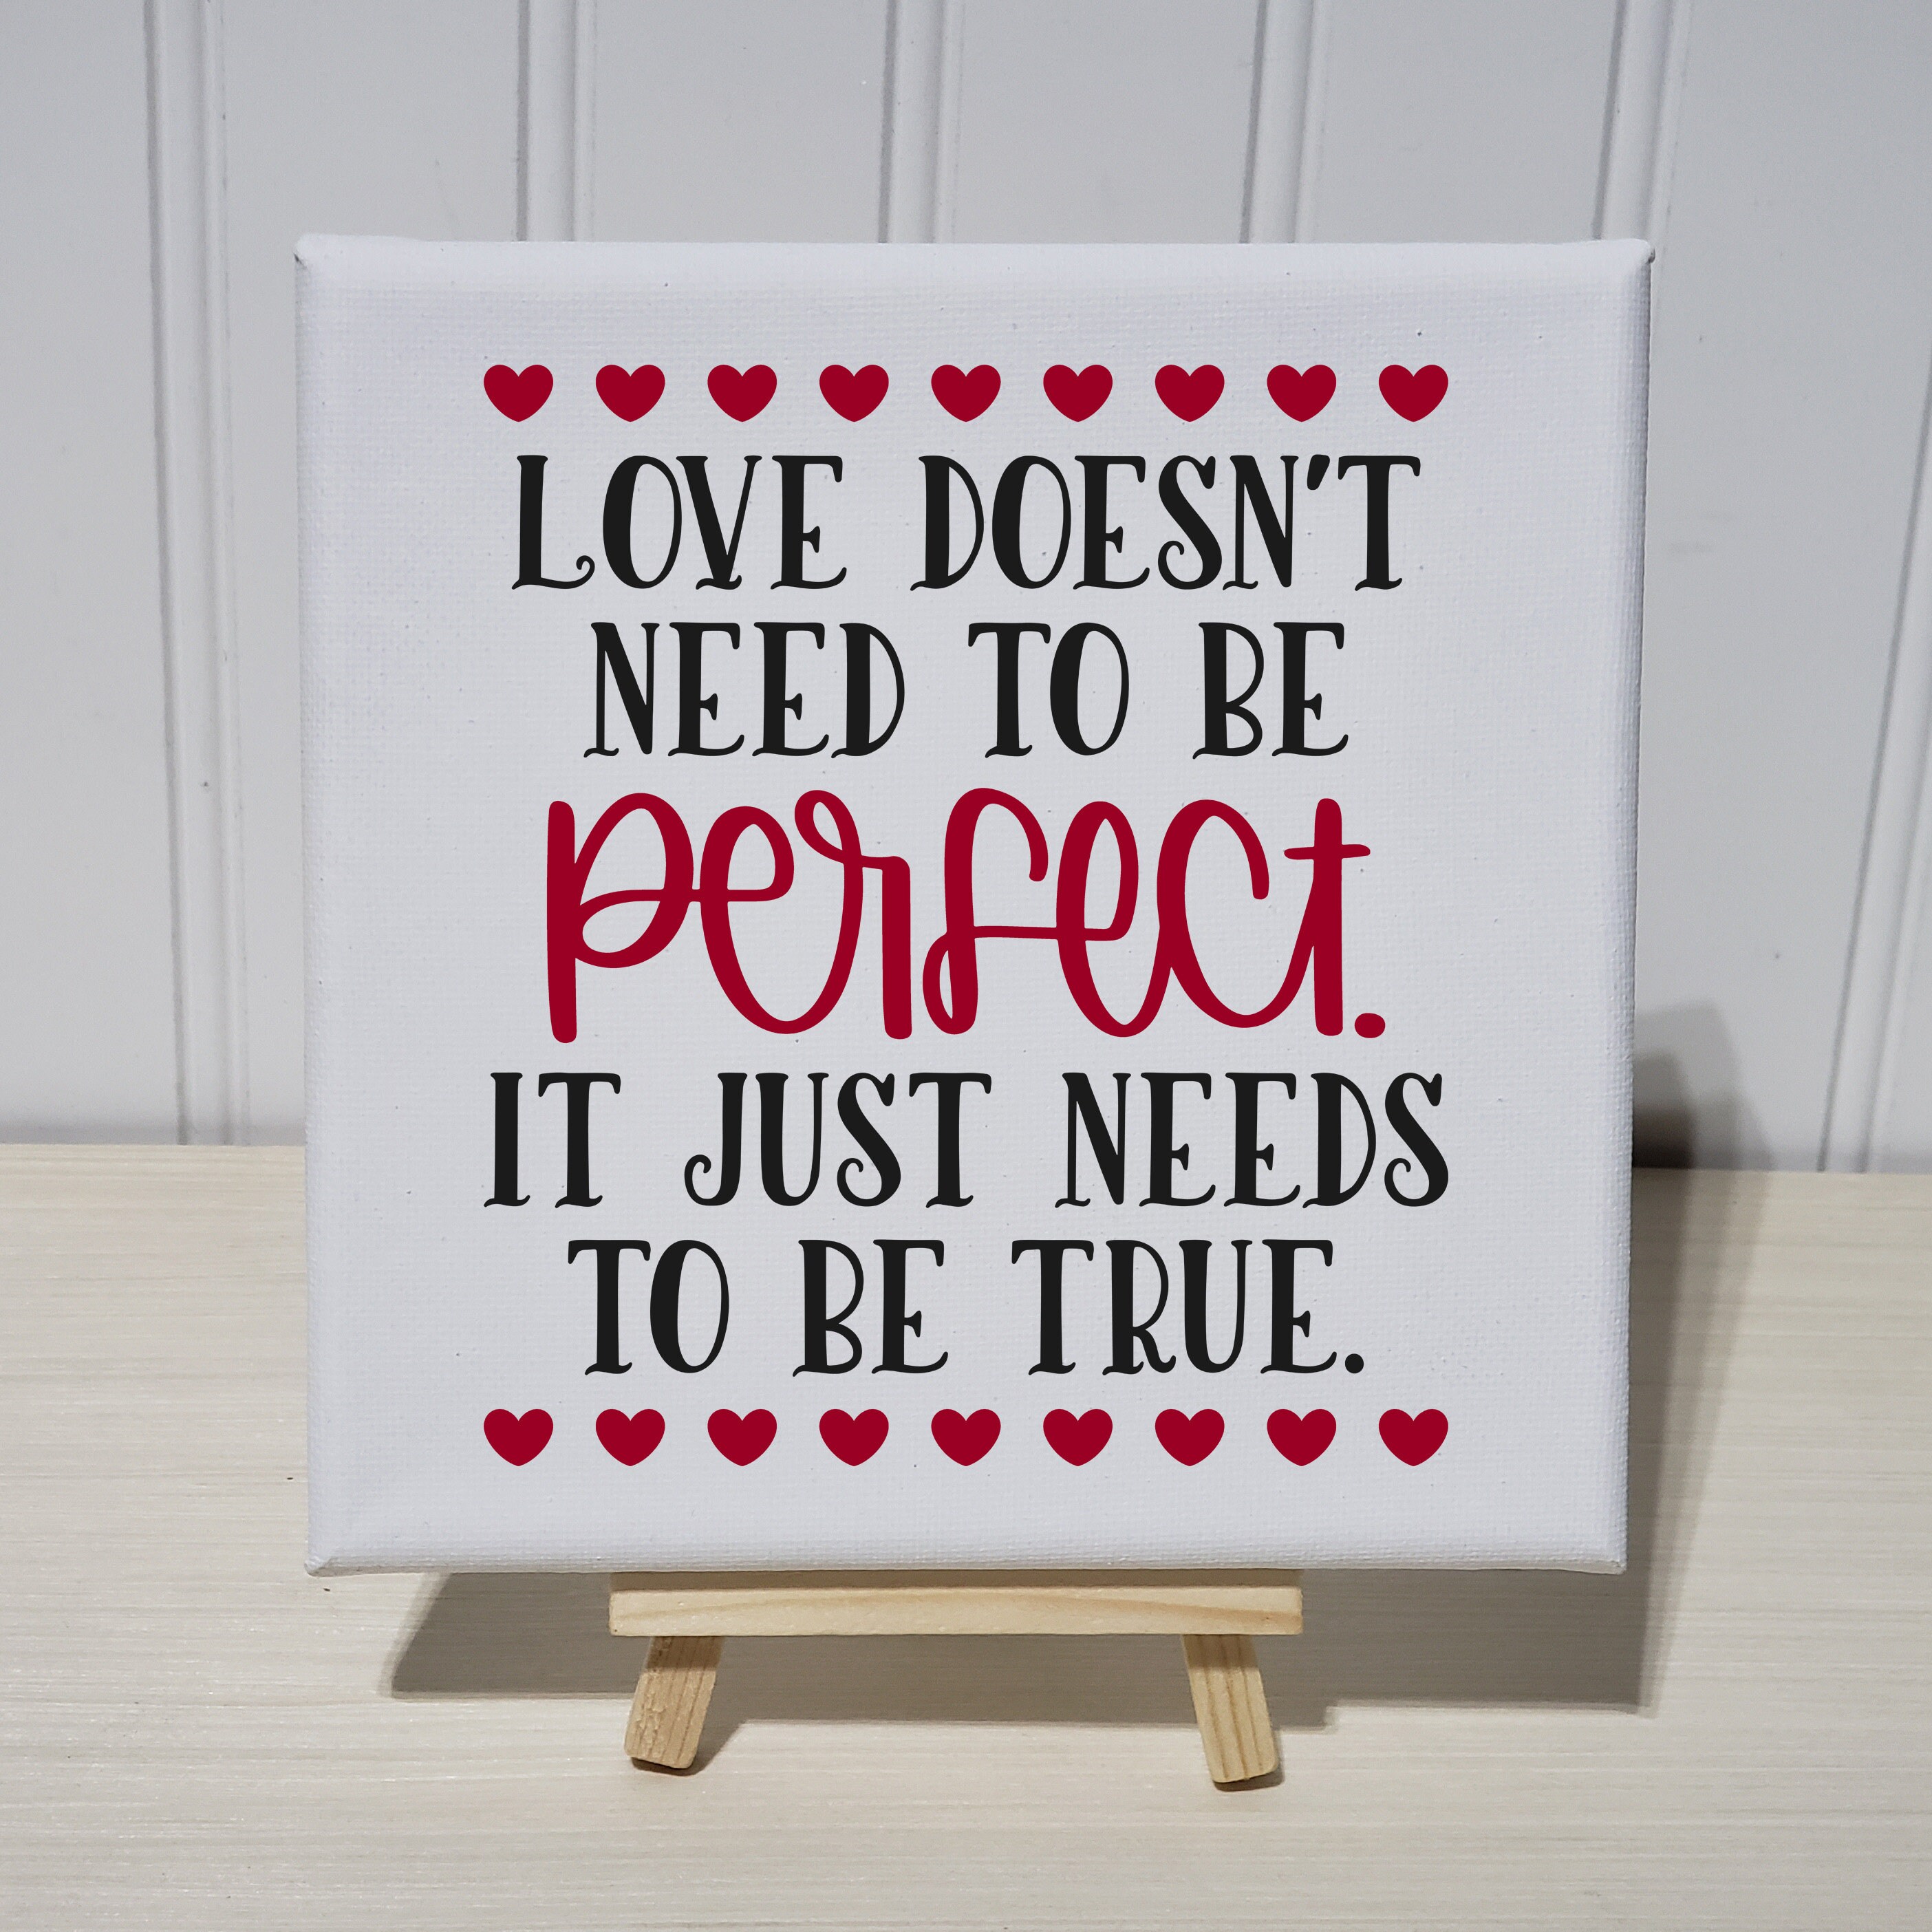 Love Doesn't Need to Be Perfect It Just Needs to Be True 6x6 Canvas Sign  Art Print Easel Stand Love Valentine Gift Romantic Present 